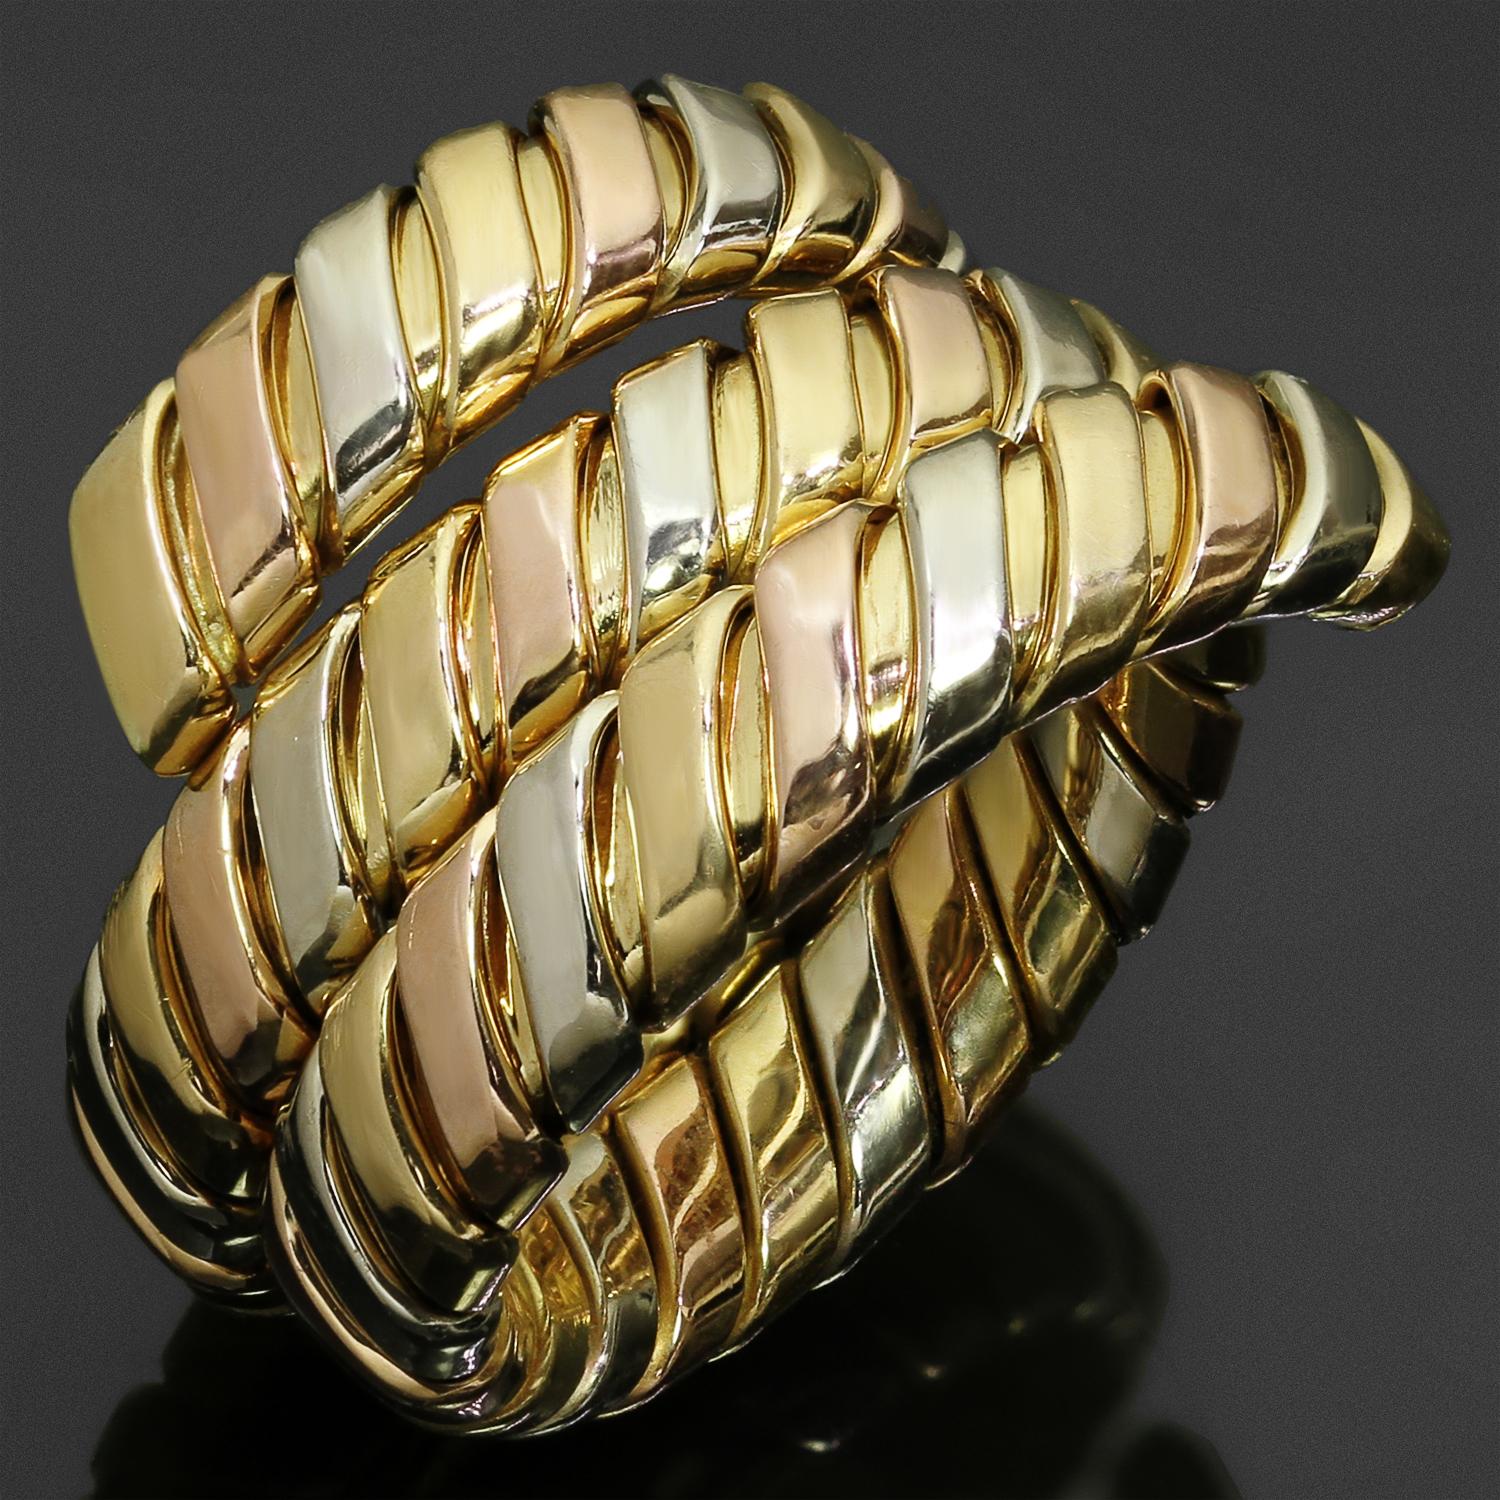 This fabulous Bvlgari ring from the classic Tubogas collection features a slightly adjustable wrap design crafted in 18k yellow, white, and rose gold. Made in Italy circa 1990s. The ring size is adjustable from size 6.5 to 7.5. Measurements: 0.66